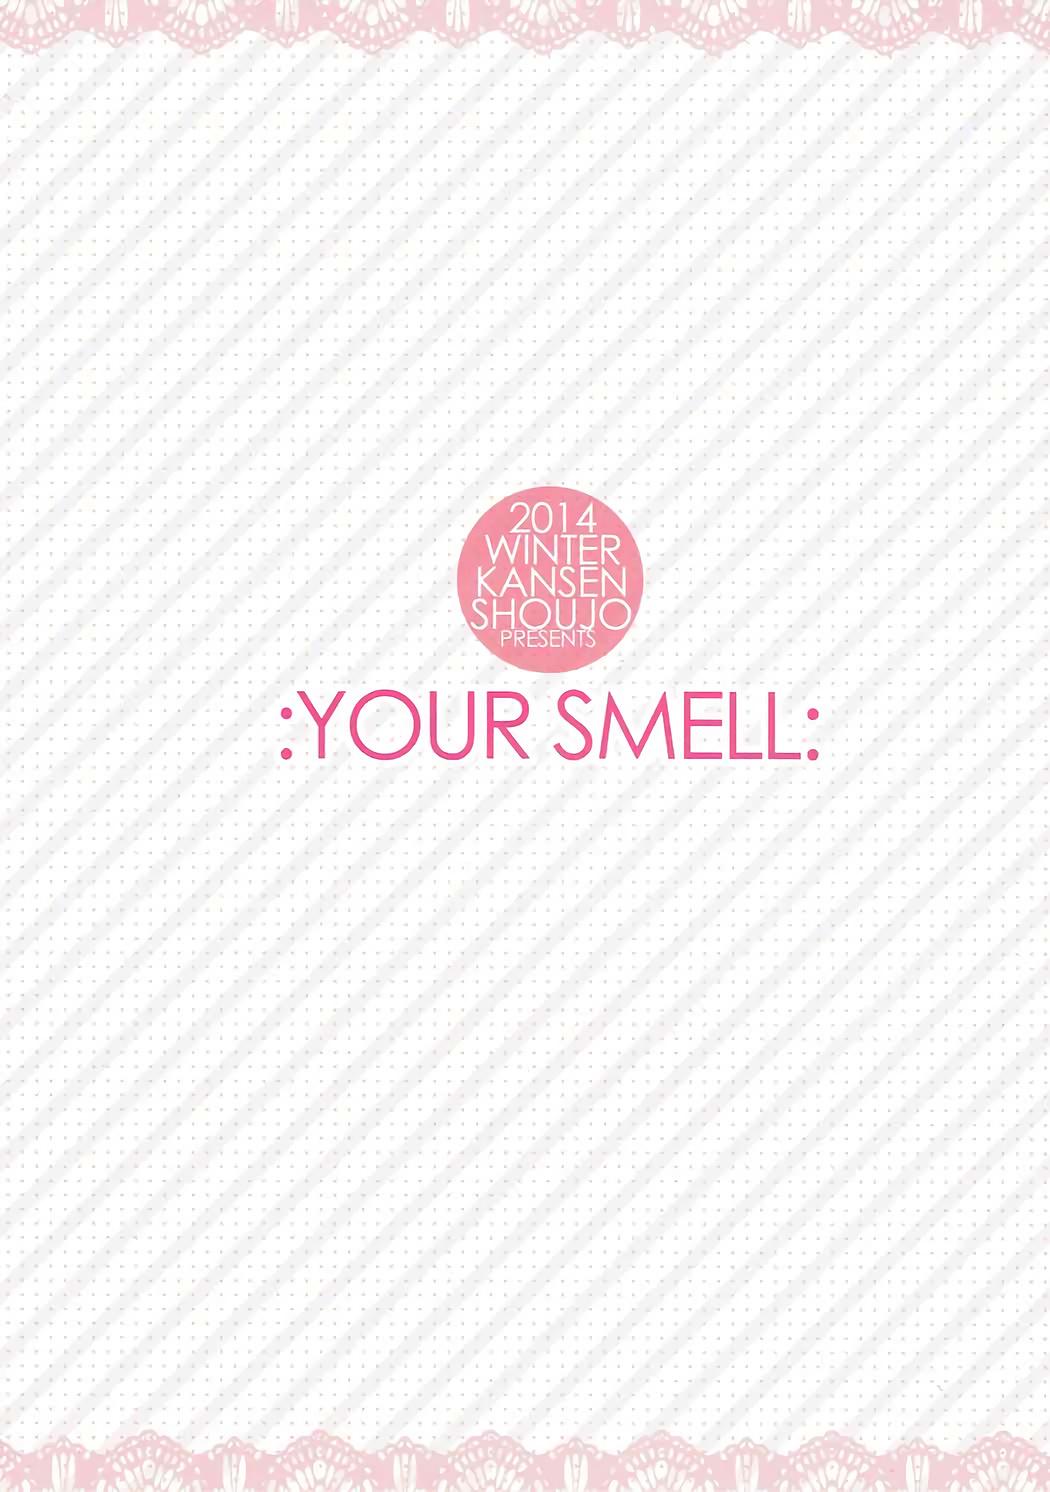 YOUR SMELL 21